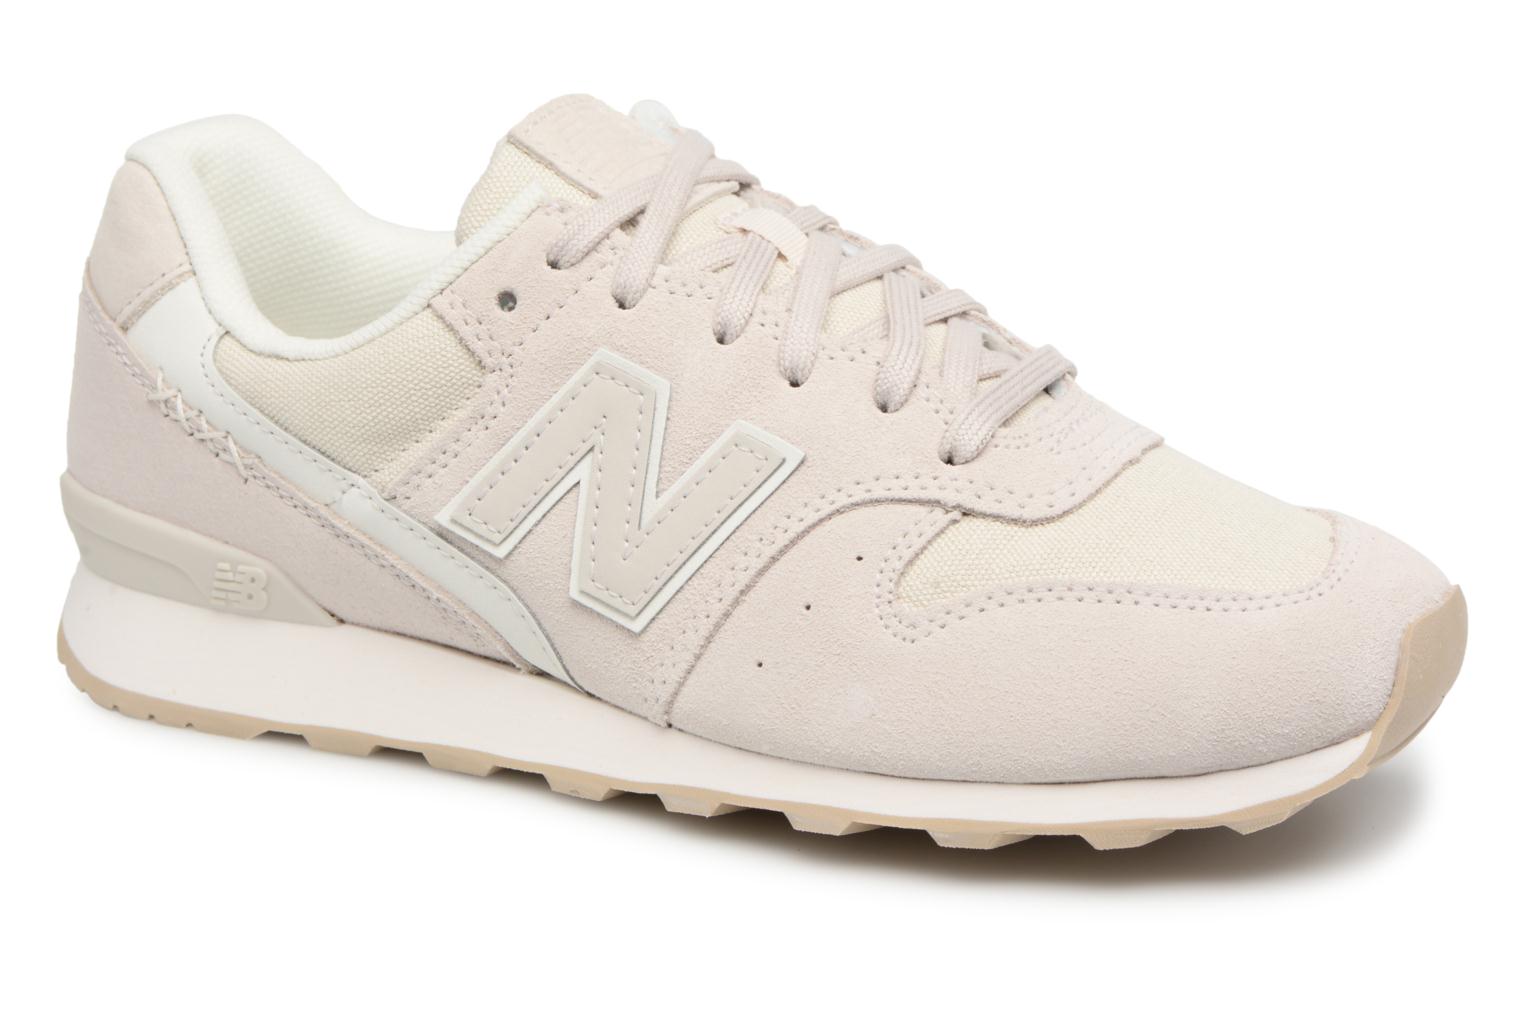 new balance wr996 w chaussures beige or